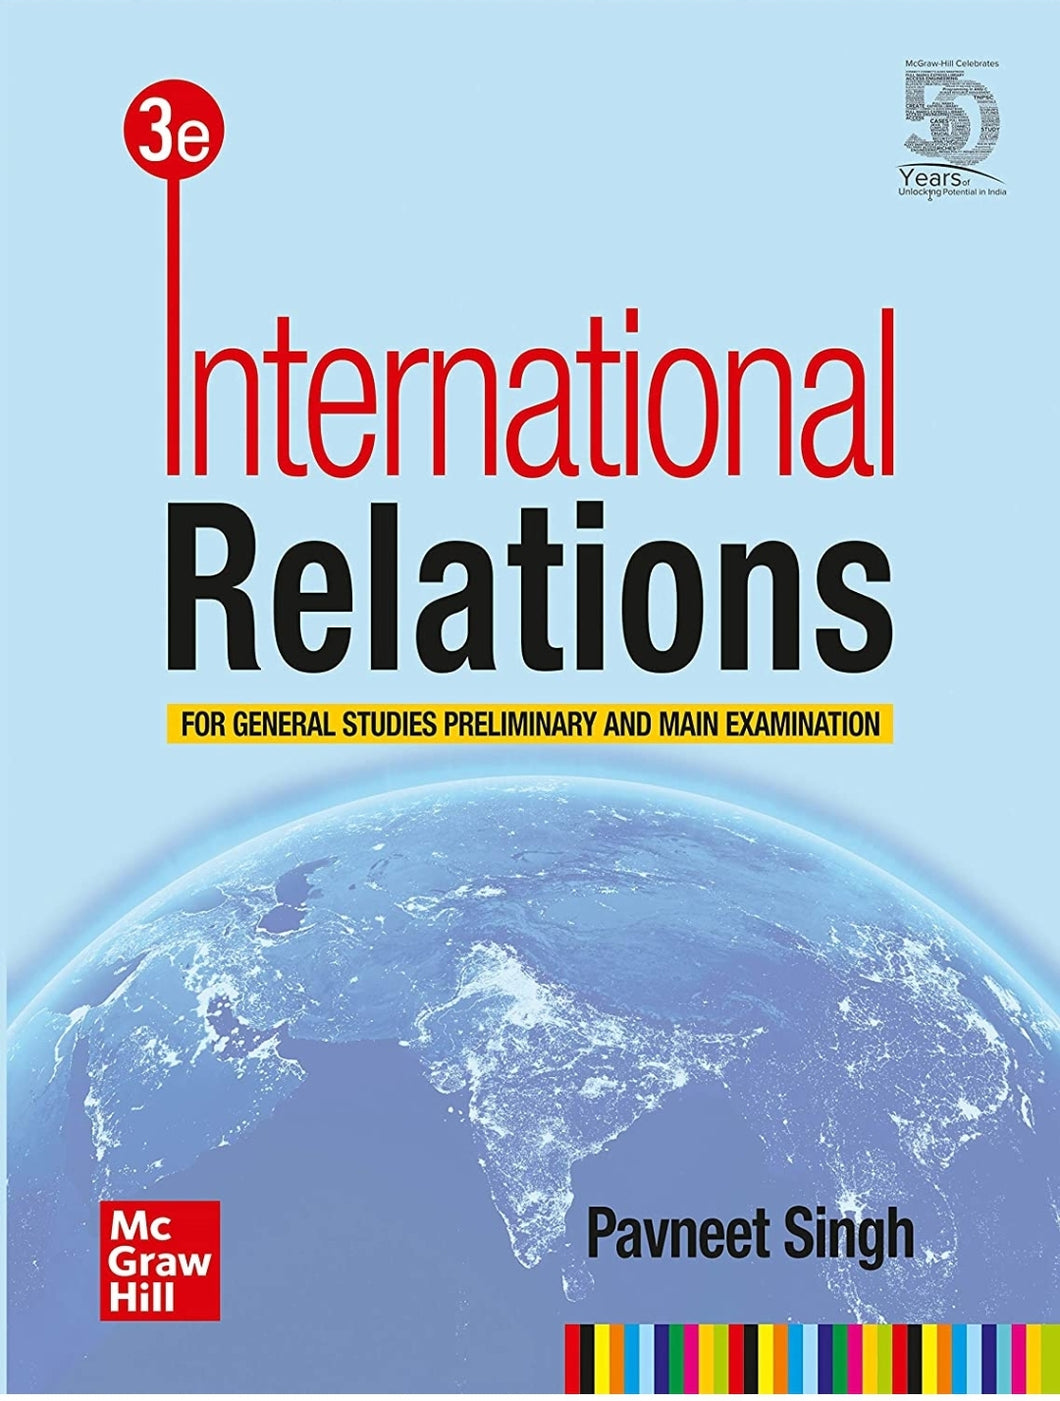 International Relations For General Studies Preliminary and Main Examination | Third Edition